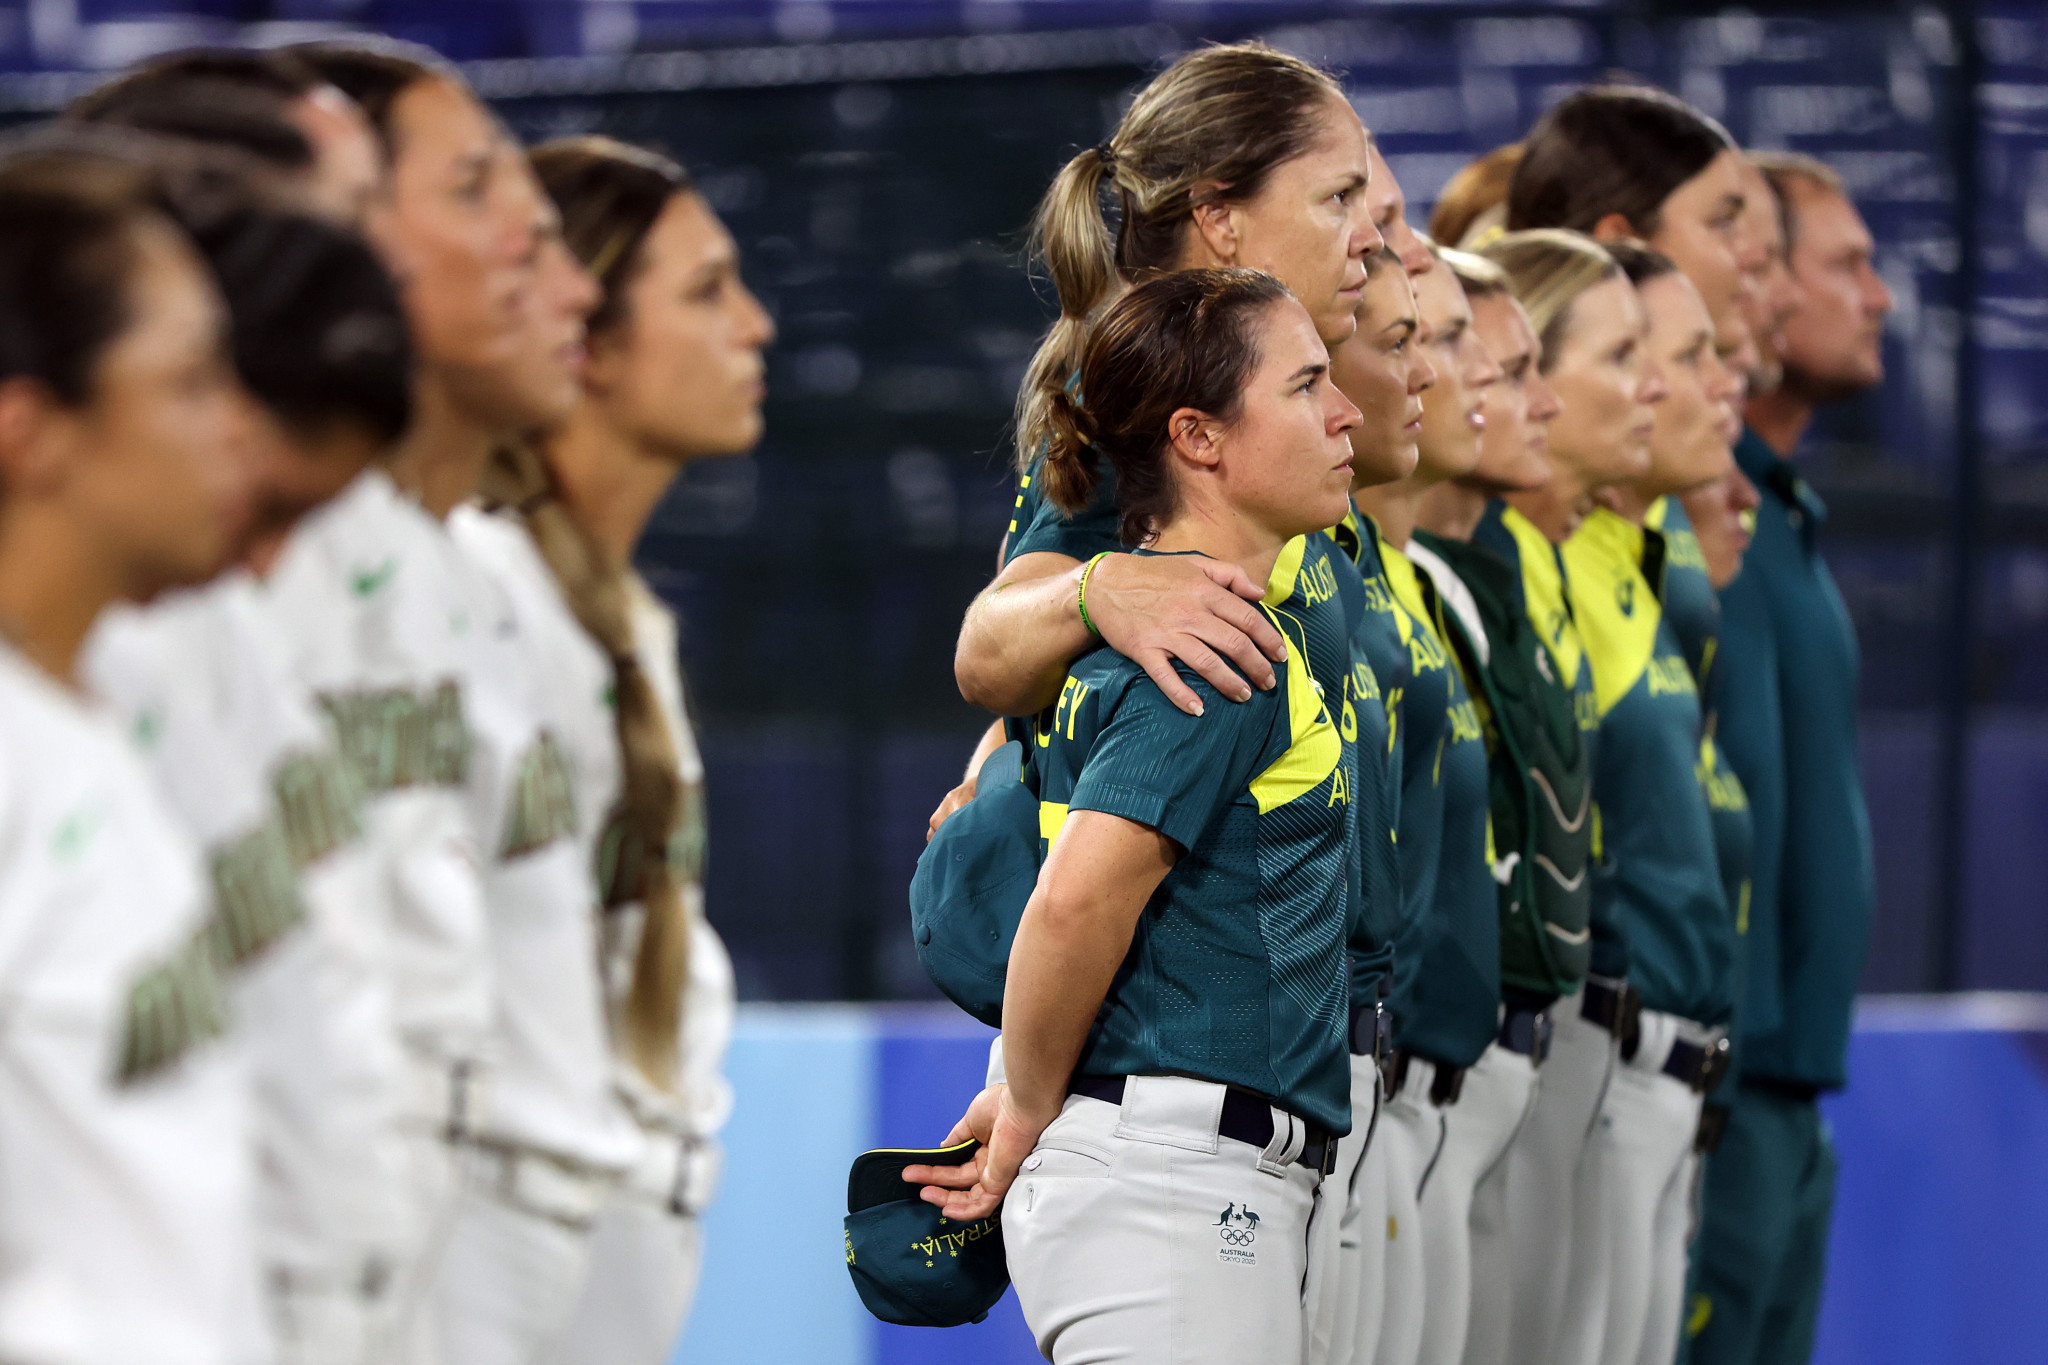 Australia's women's softball team placed fifth at Tokyo 2020 ©Getty Images